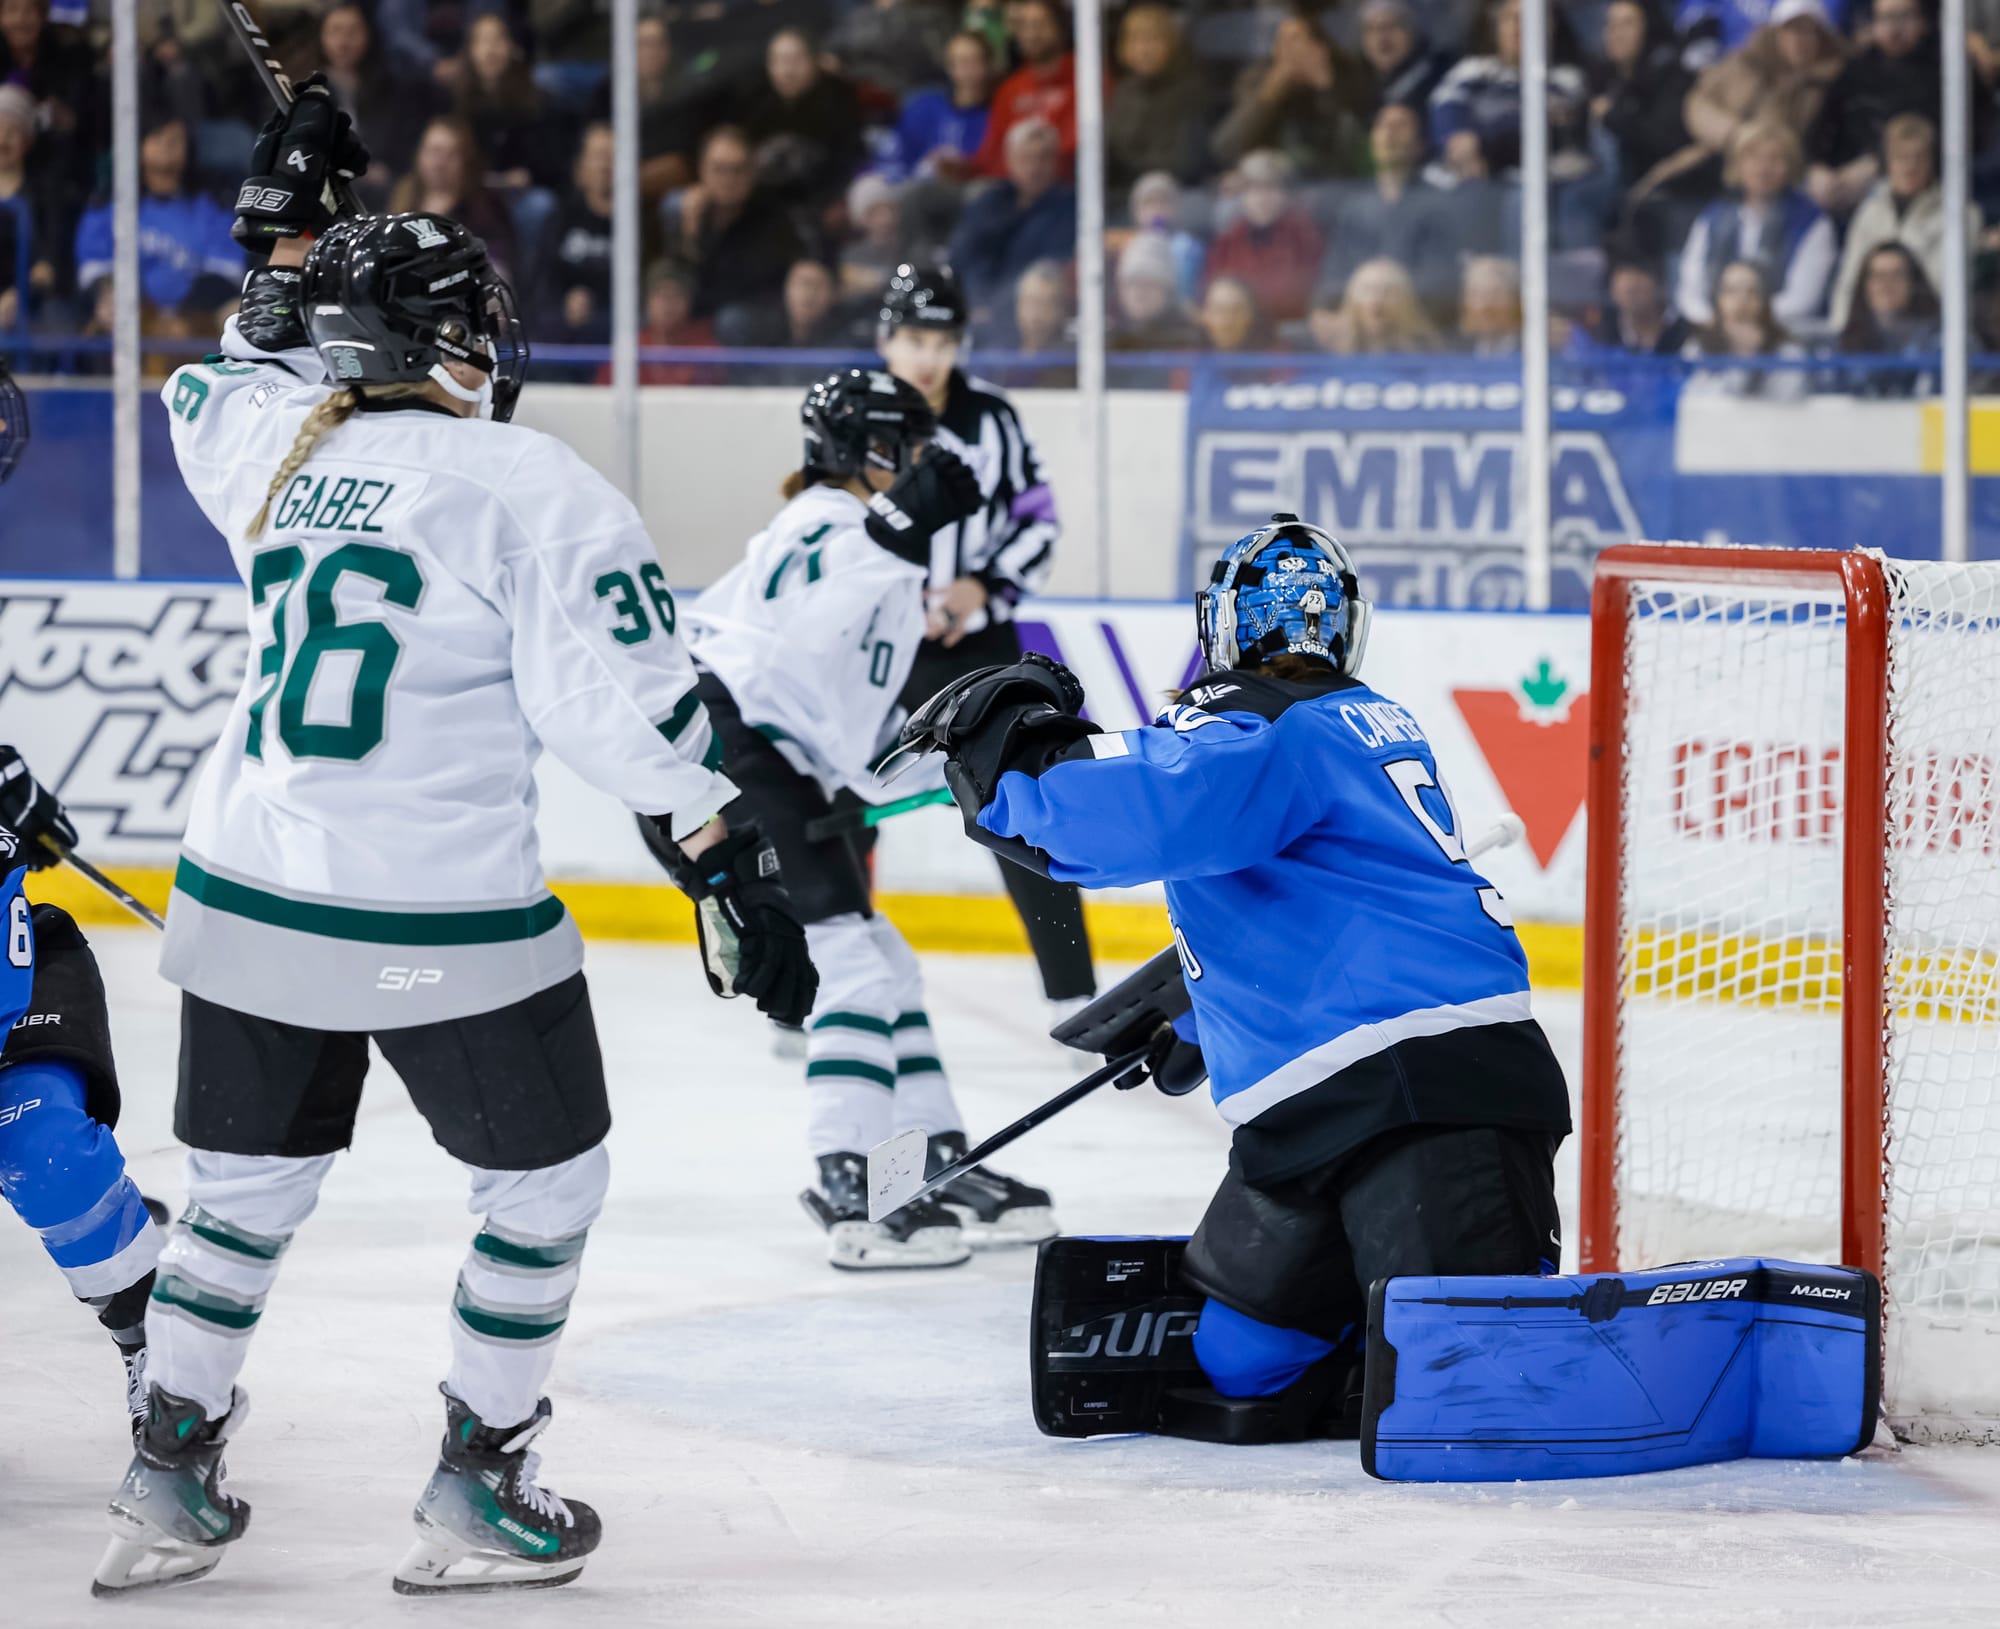 Loren Gabel, wearing a white away uniform, celebrates her goal against Toronto in front of Kristen Campbell, wearing her blue home pads and uniform.